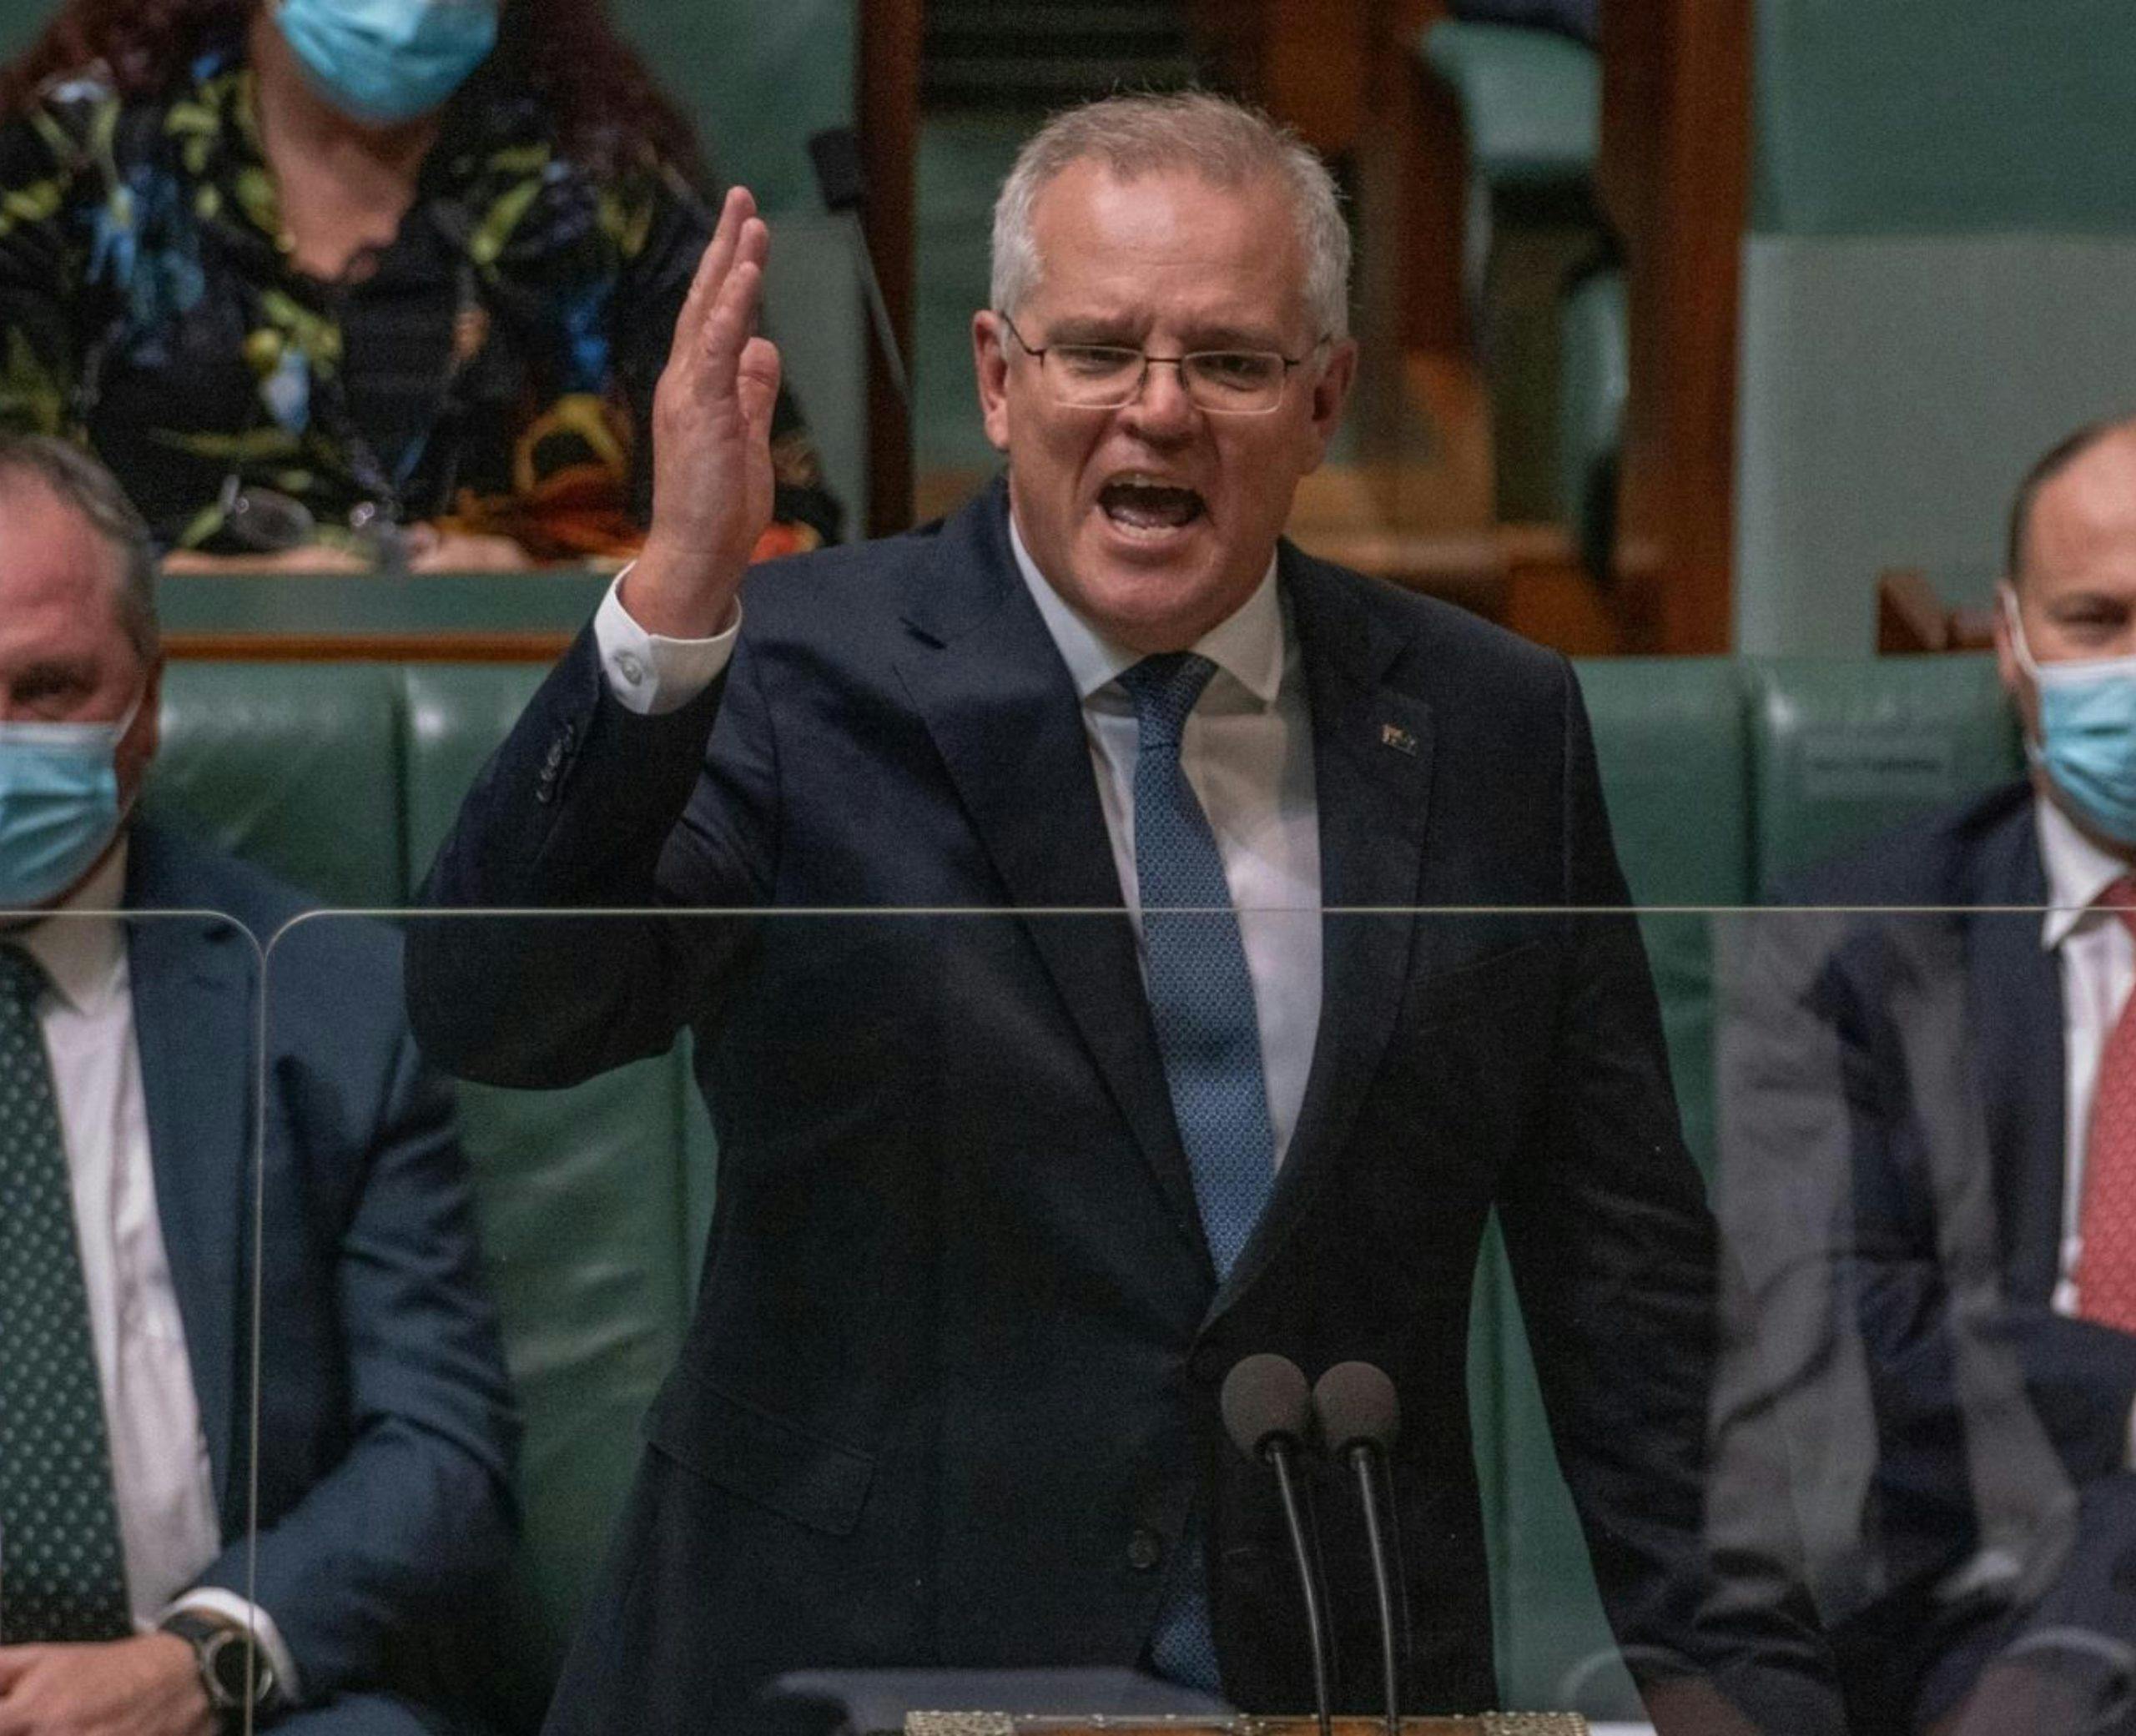 Scott Morrison standing in the lower house of Parliament with Barnaby Joyce and Joshua Frydenburg sitting behind him in masks and suits. Morrison has his right hand raised and is mid-speech